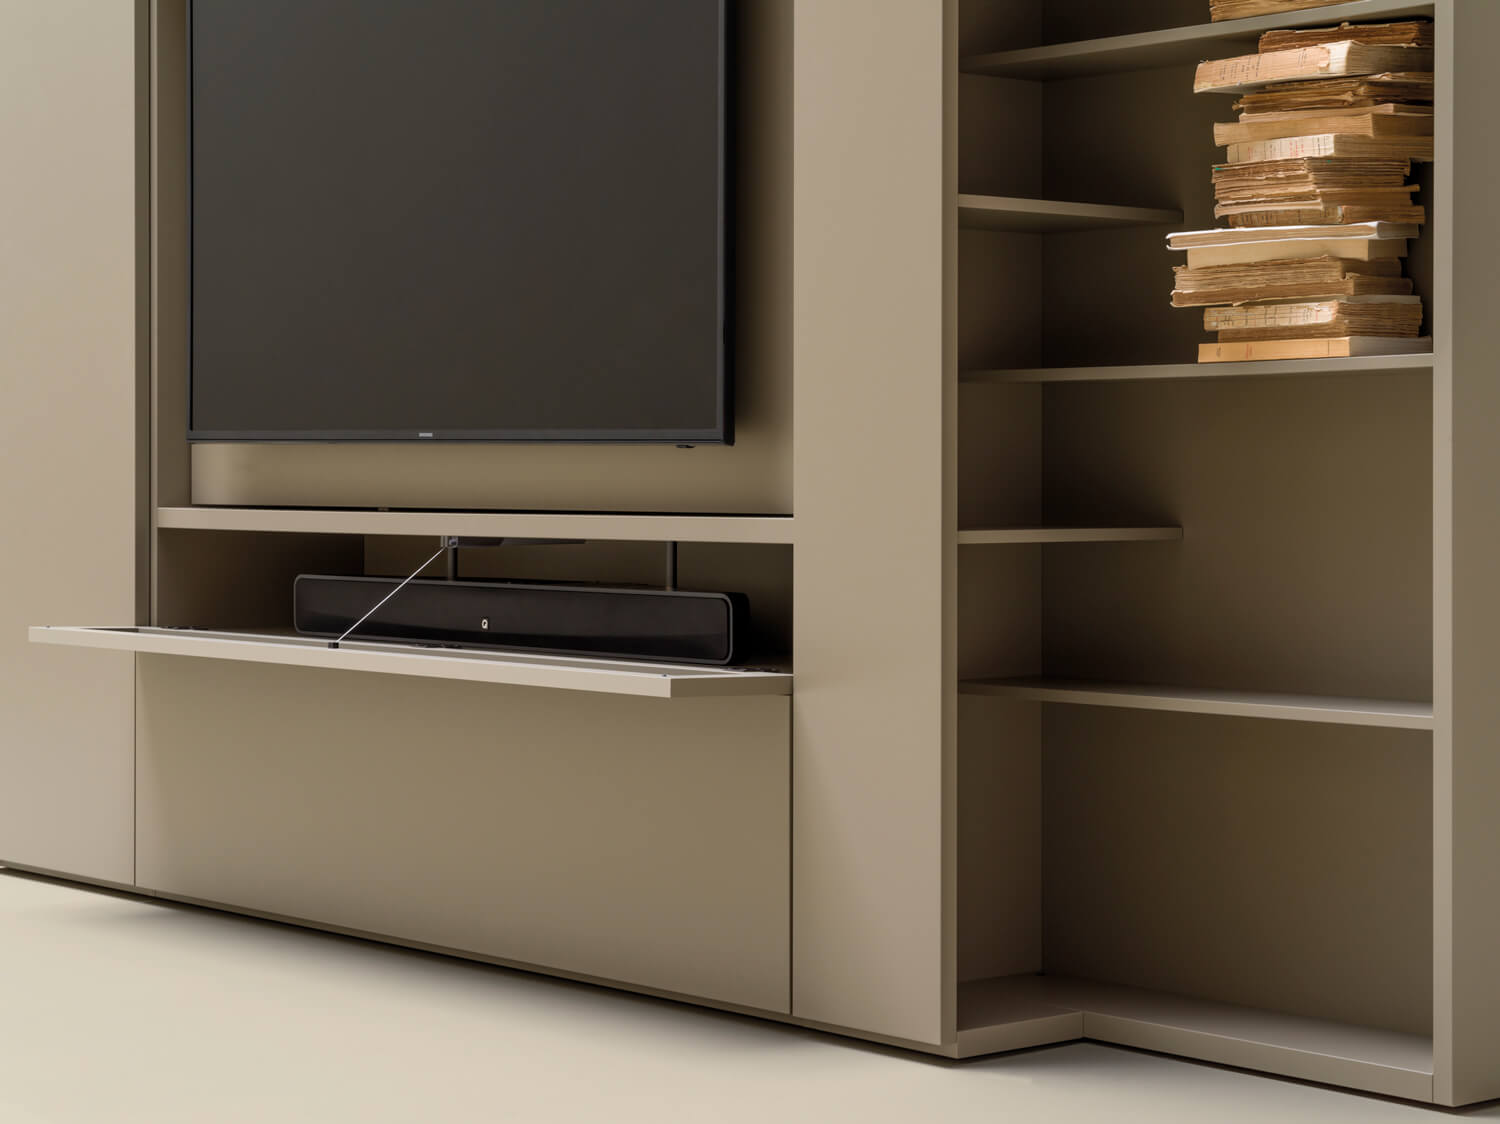 The compartment under the TV unit can house electronic devices and comes with or without front panel. The front panel is made to allow remote signals to come through. 